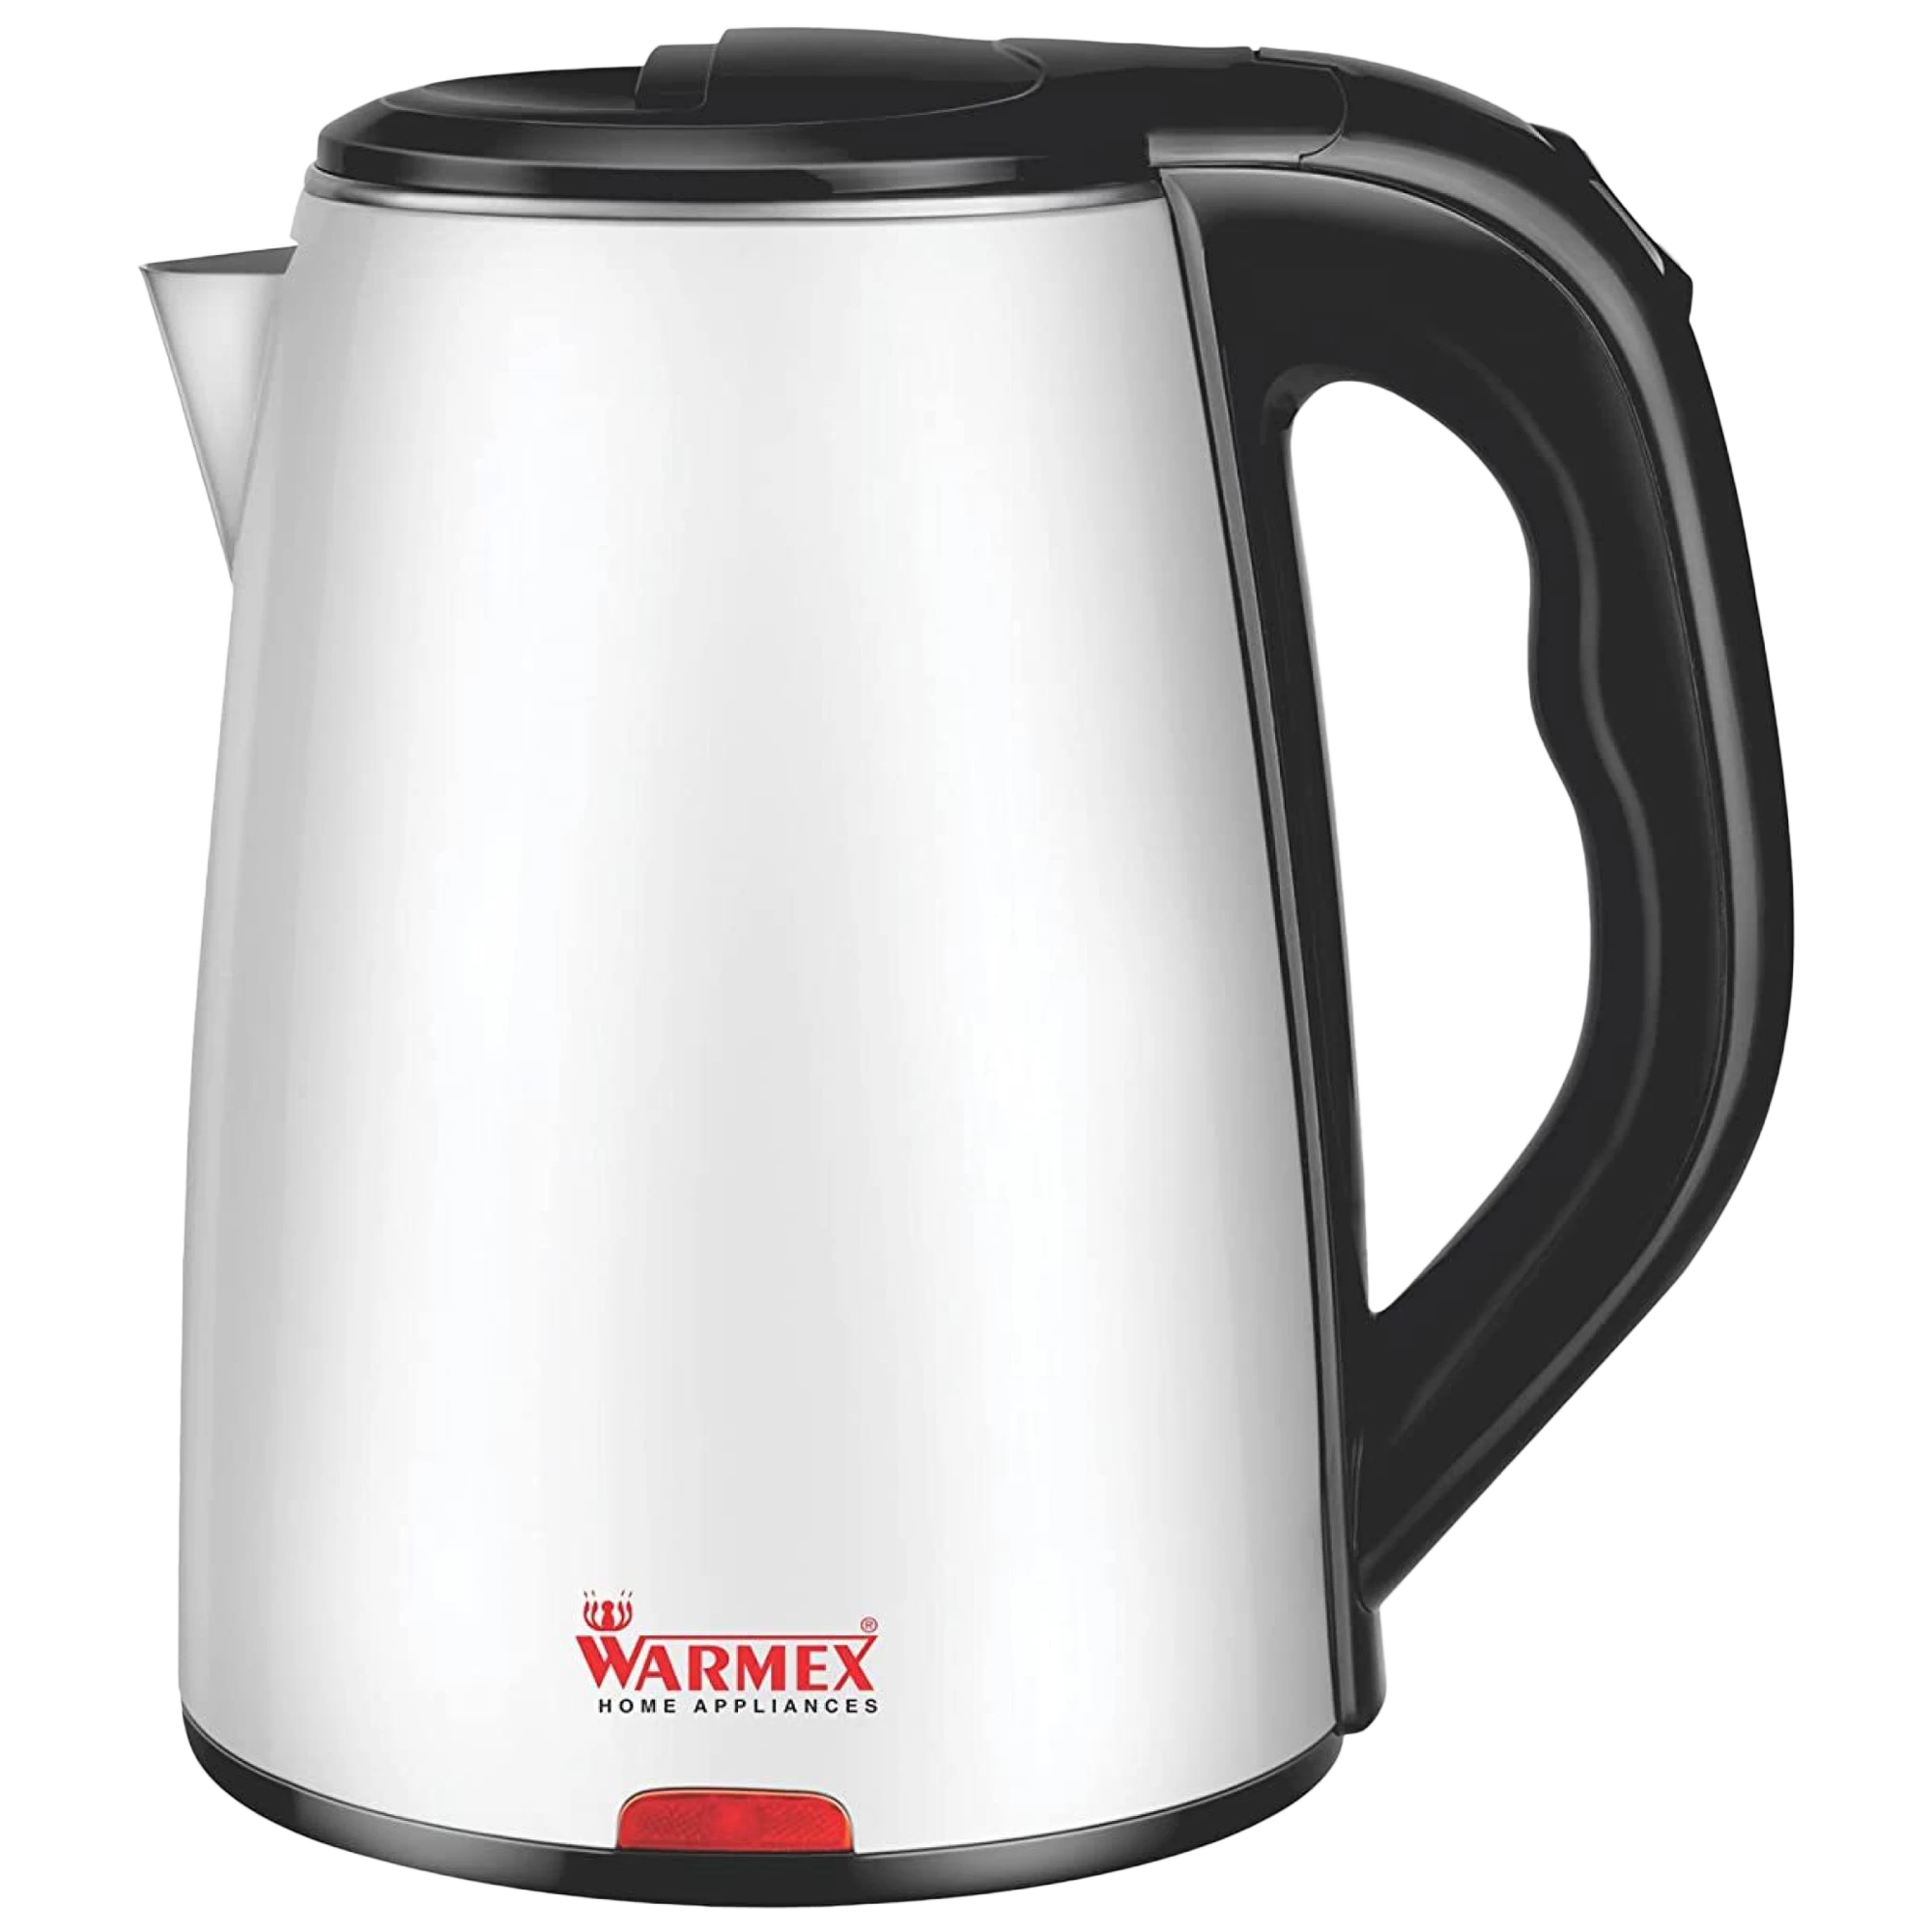 Warmex Boil and Serve 99 1.8 Litres 1500 Watts Electric Kettle (Detachable Base, Overheat Protection, White)